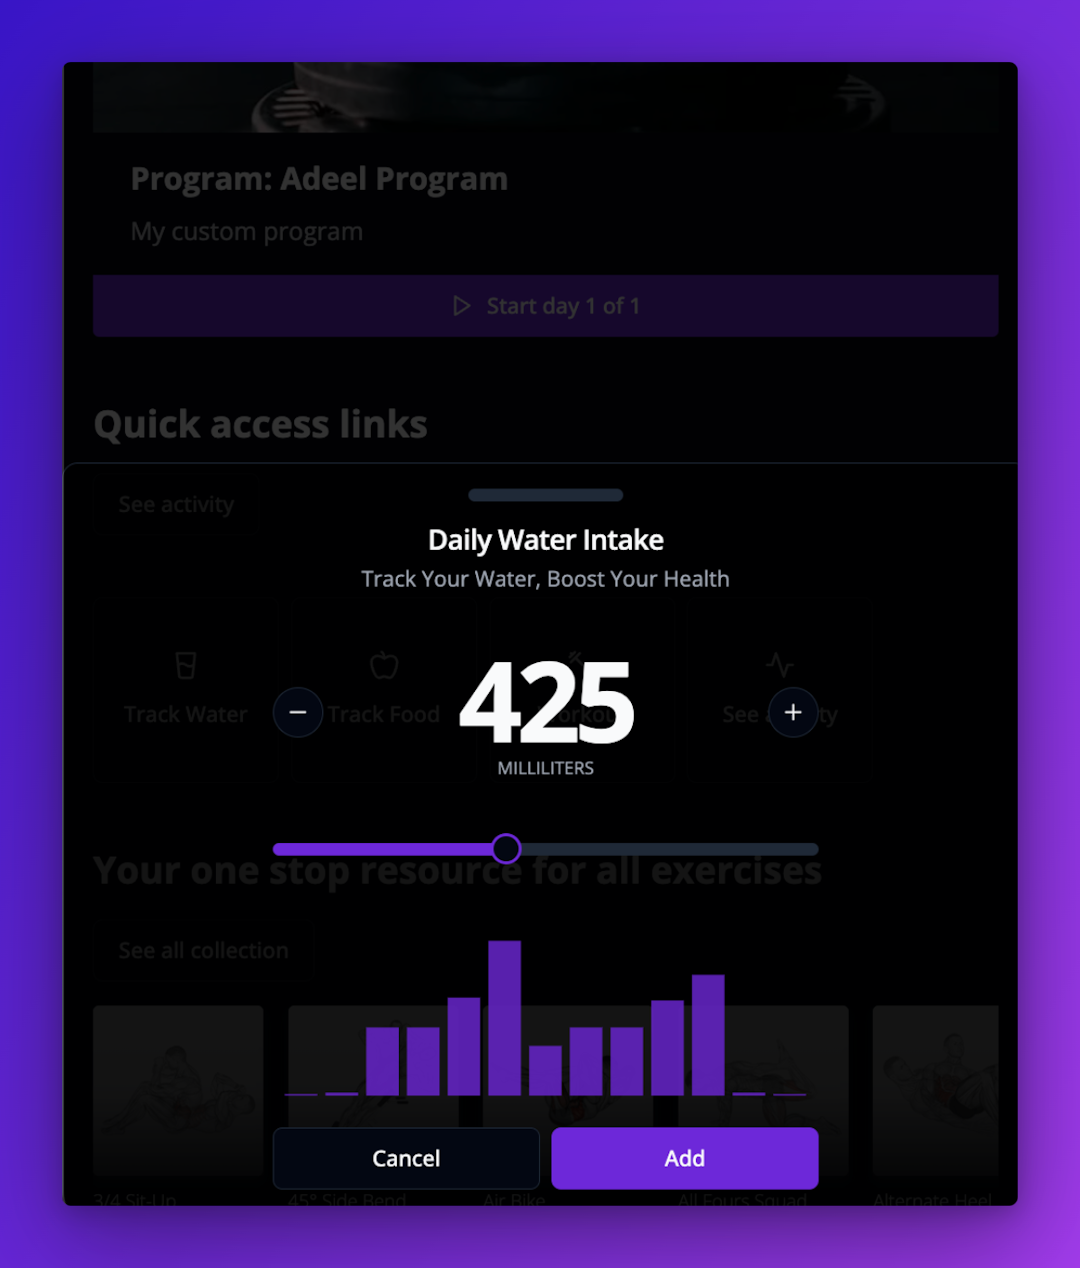 FitComrade ranked among the best water tracker app